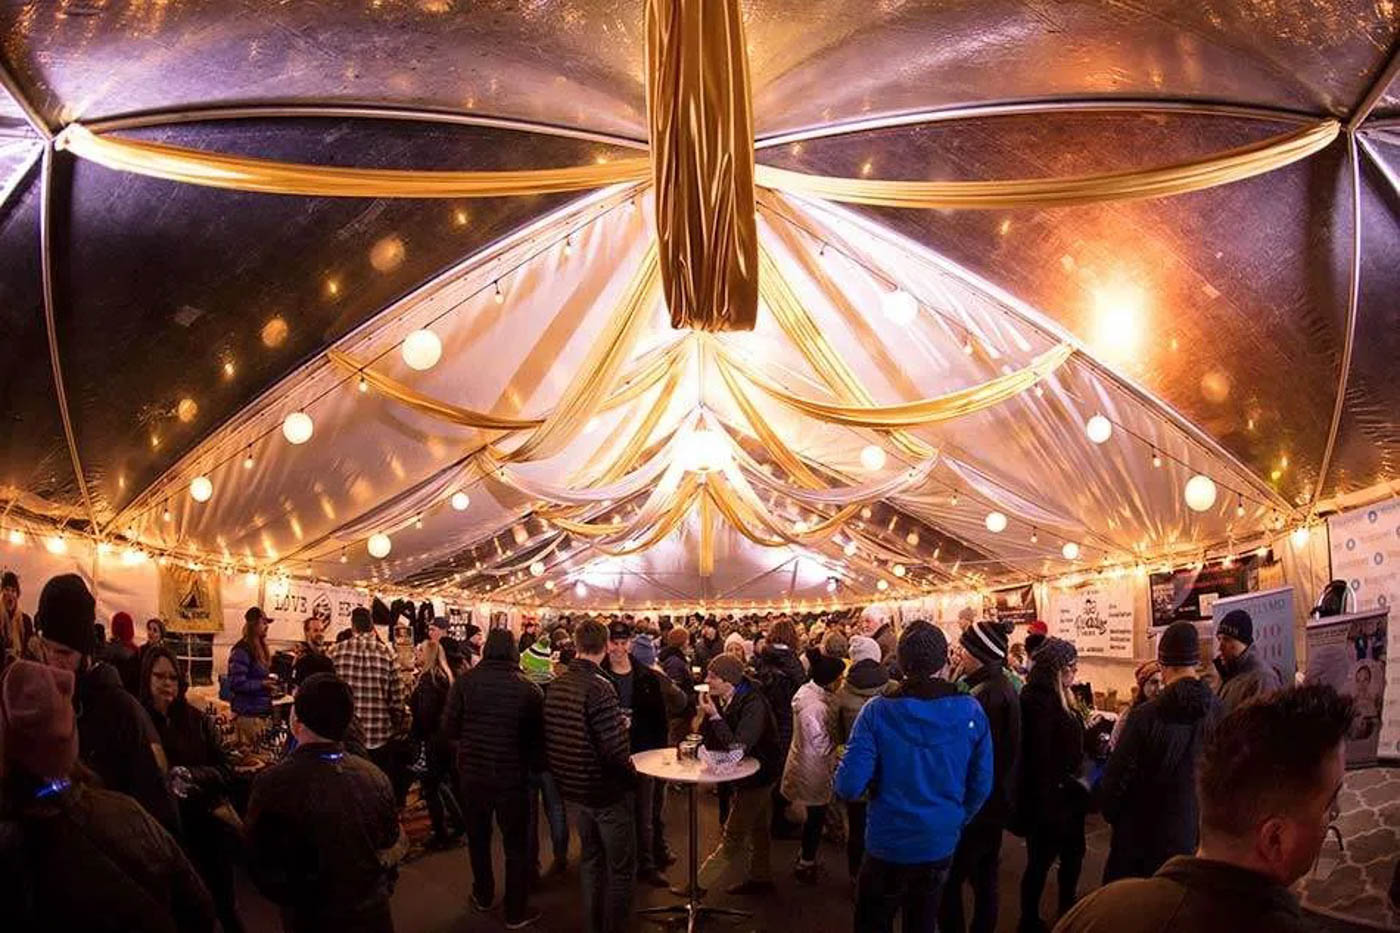 Crowds inside a luxury looking event tent at Winterfest in Bend.